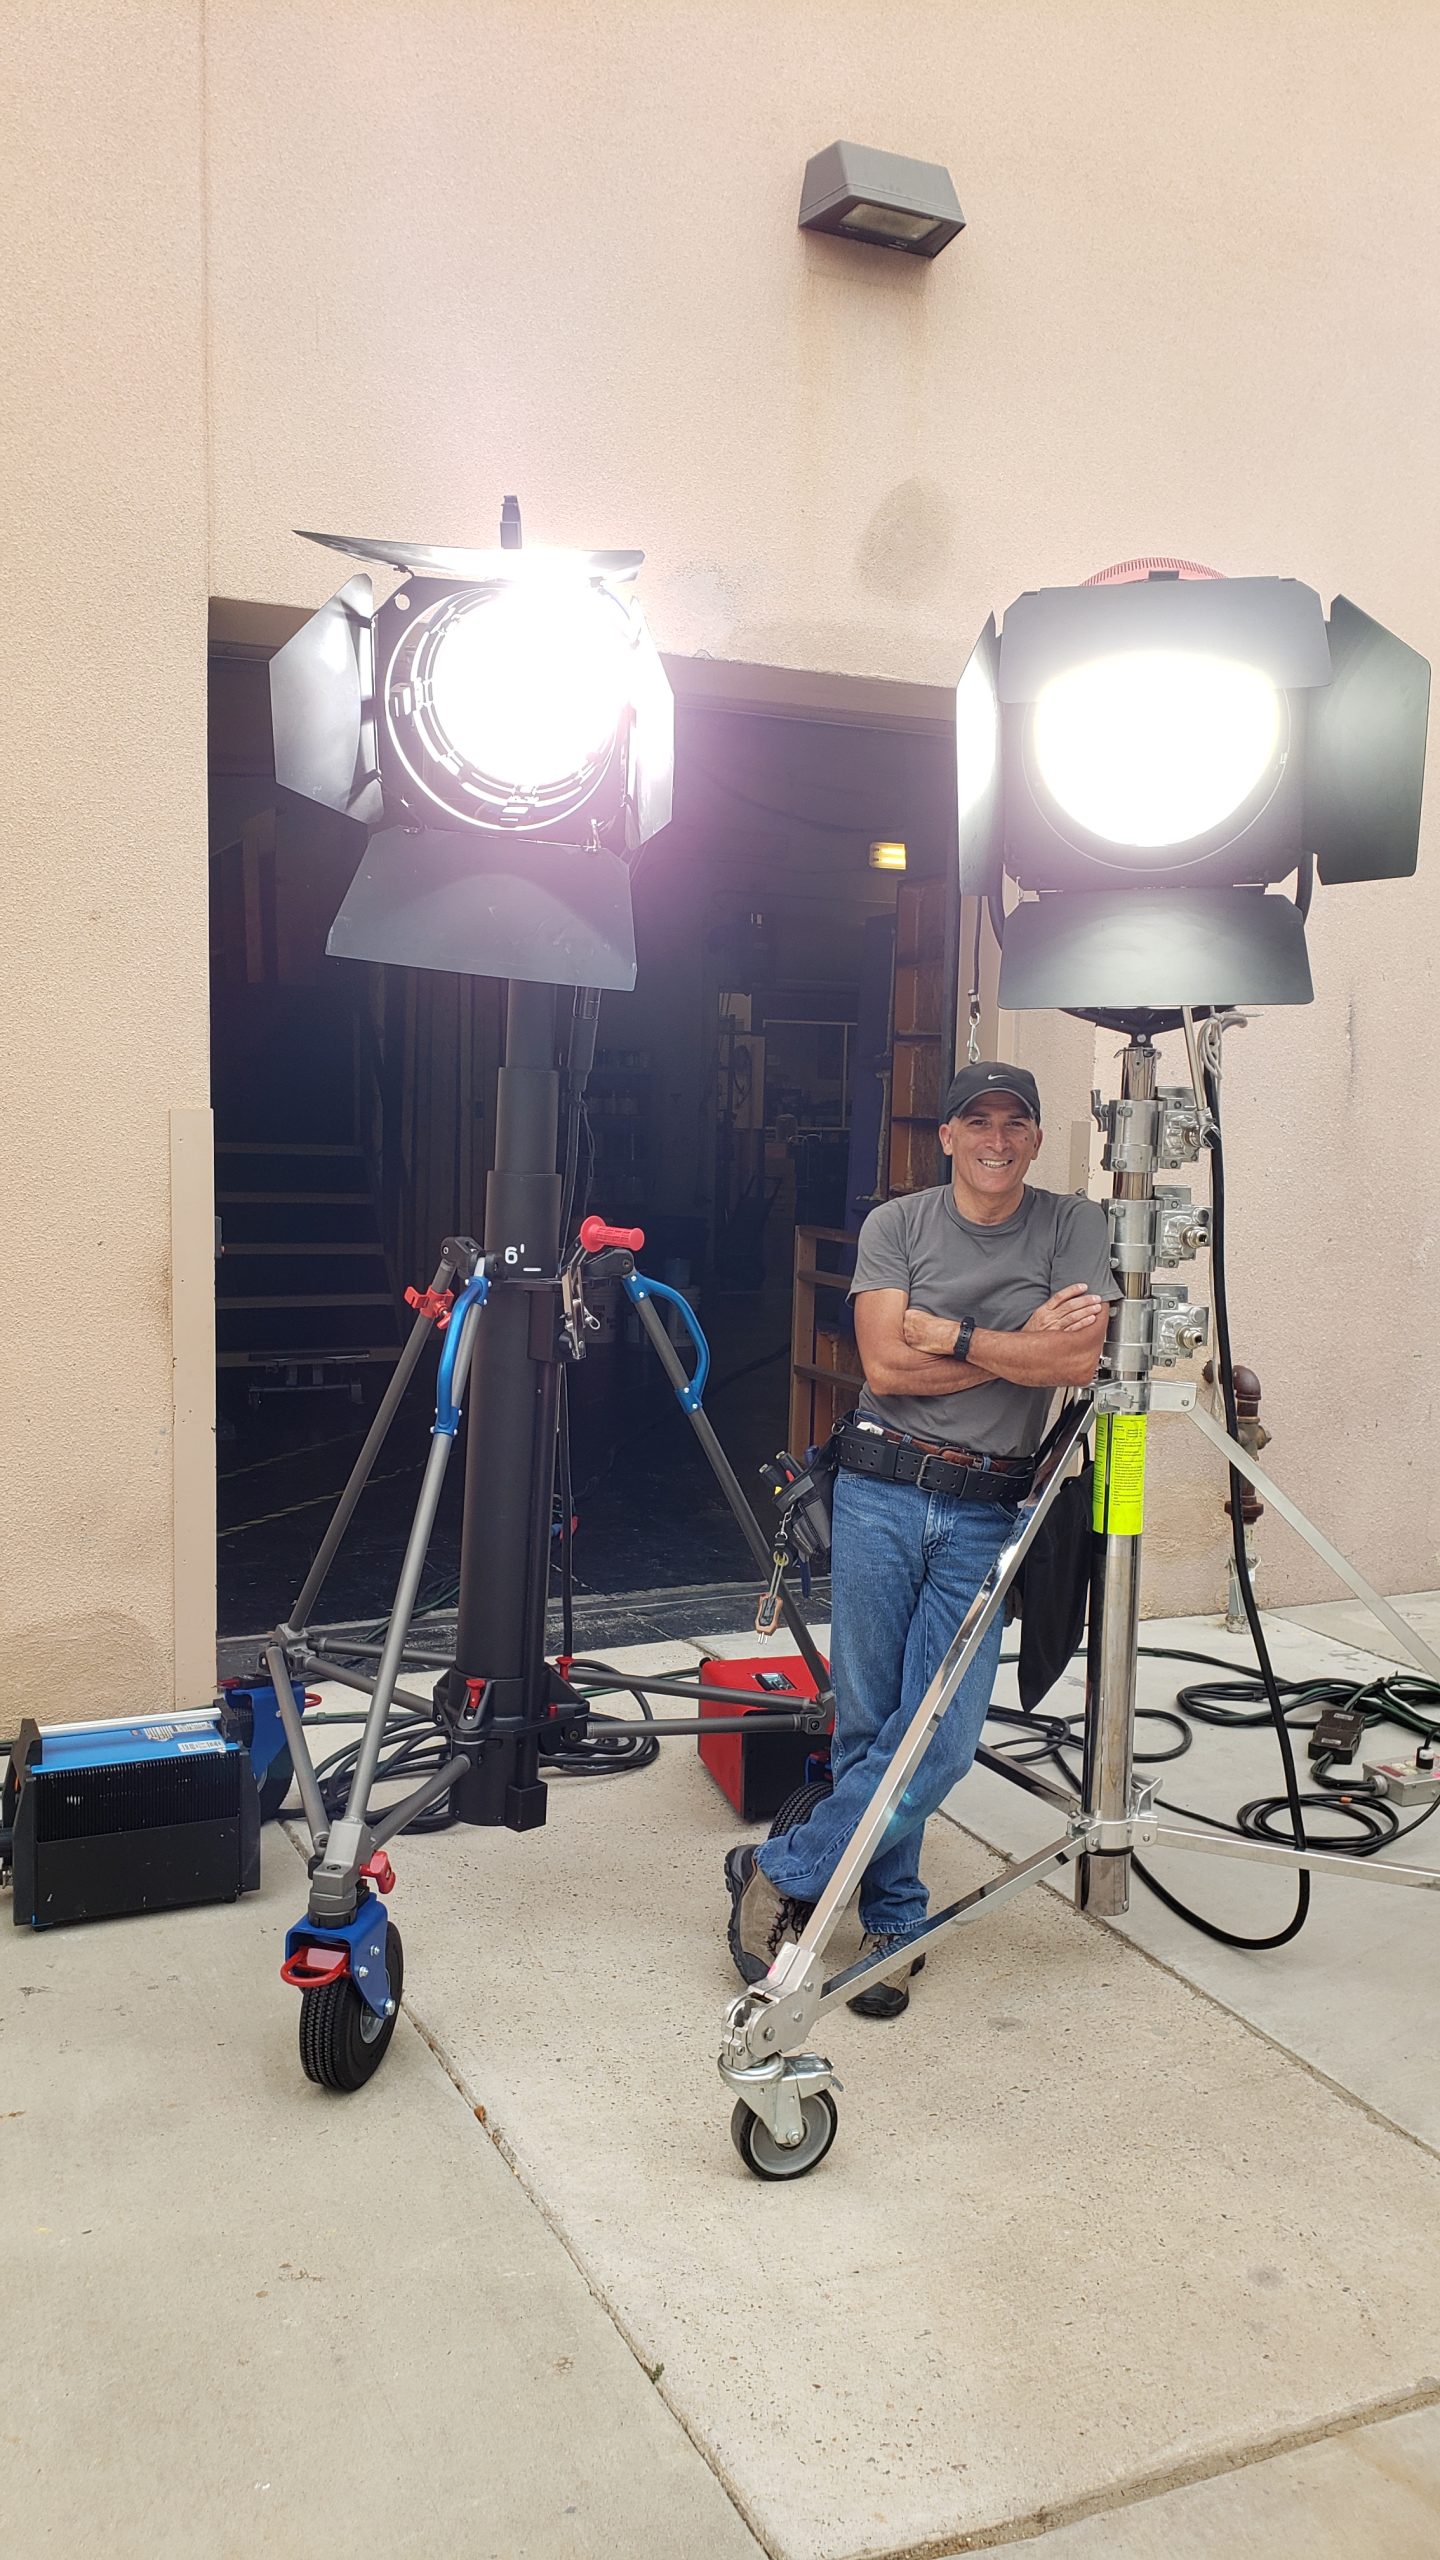 Carlos Vilkerman working as a Gaffer prepping for a night shoot